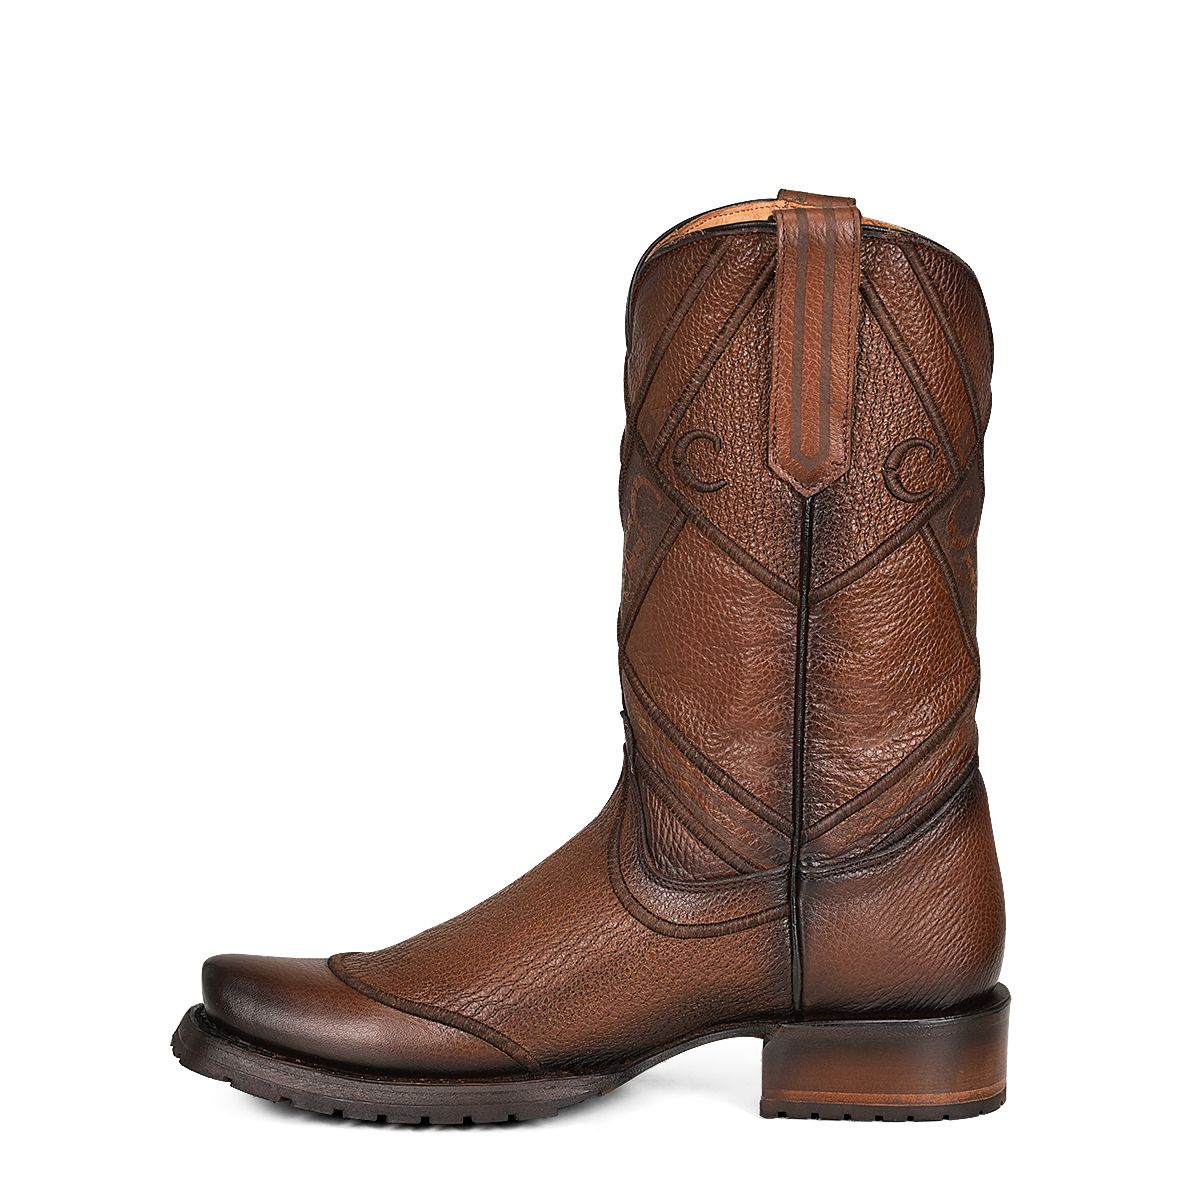 1J2MRS - Cuadra brown casual cowboy cowhide leather boots for men-Kuet.us